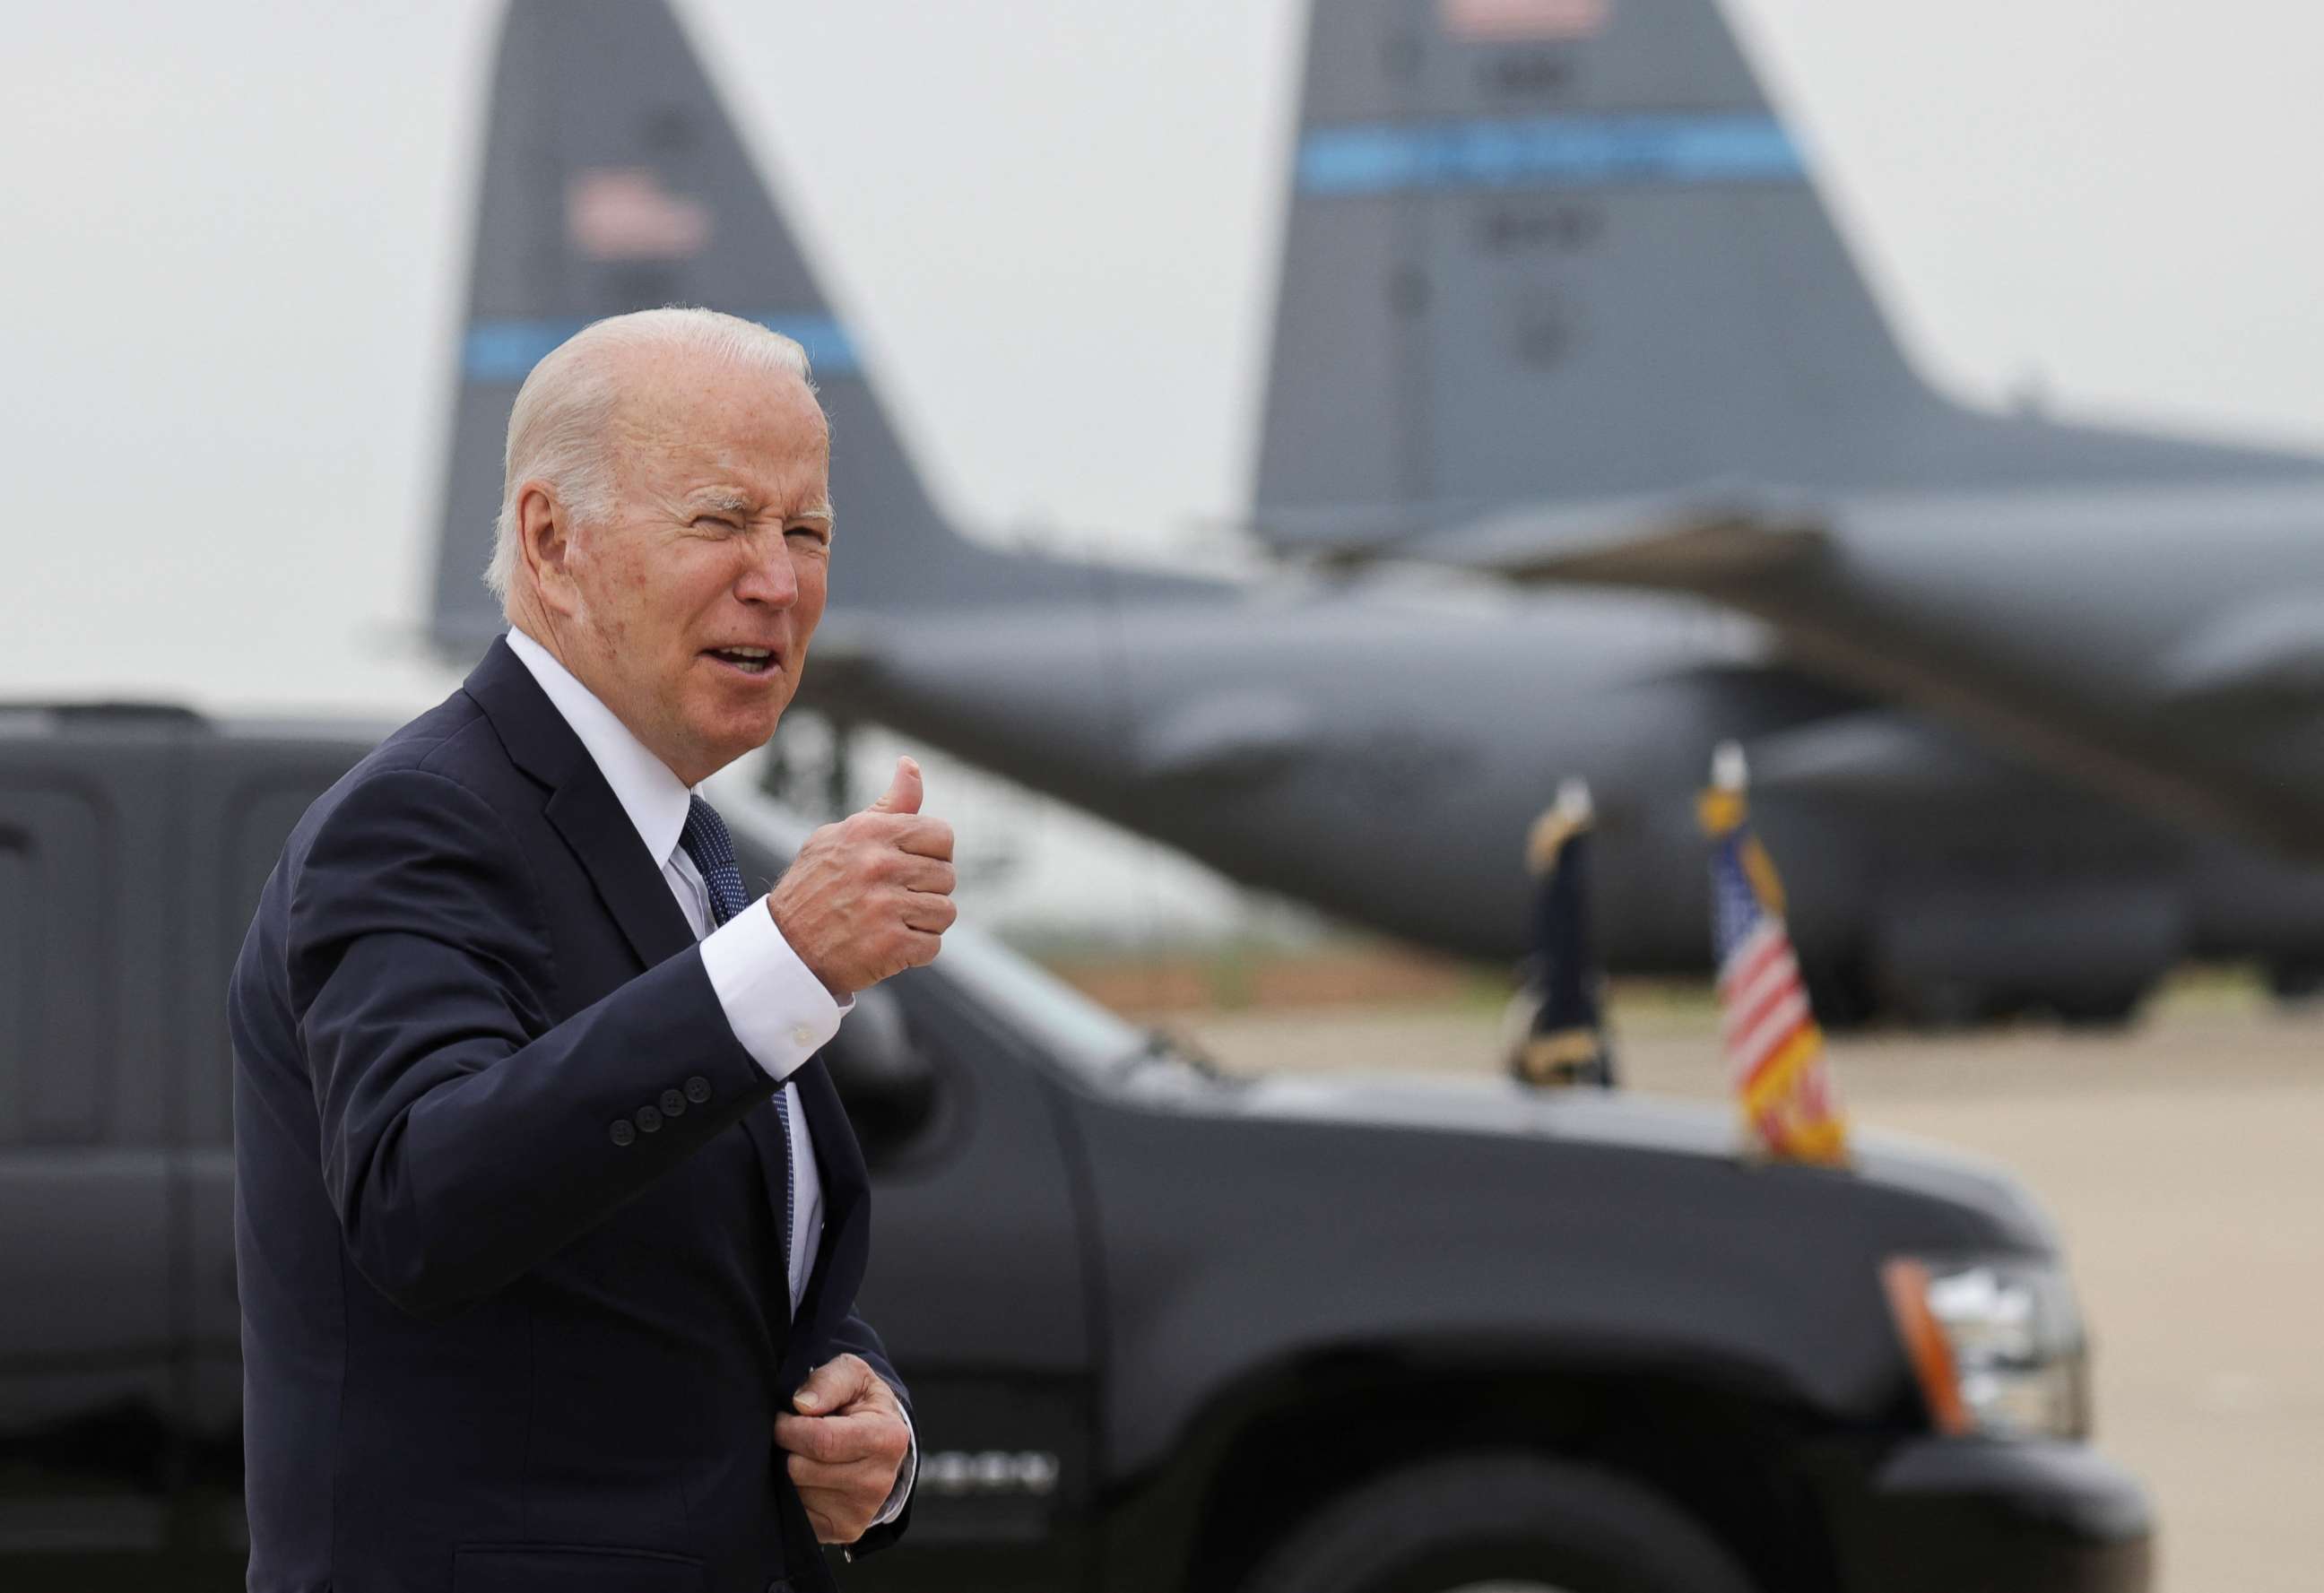 PHOTO: President Joe Biden gestures as he arrives to board Air Force One at Delaware Air National Guard Base, in New Castle, Delaware, U.S., April 25, 2022.